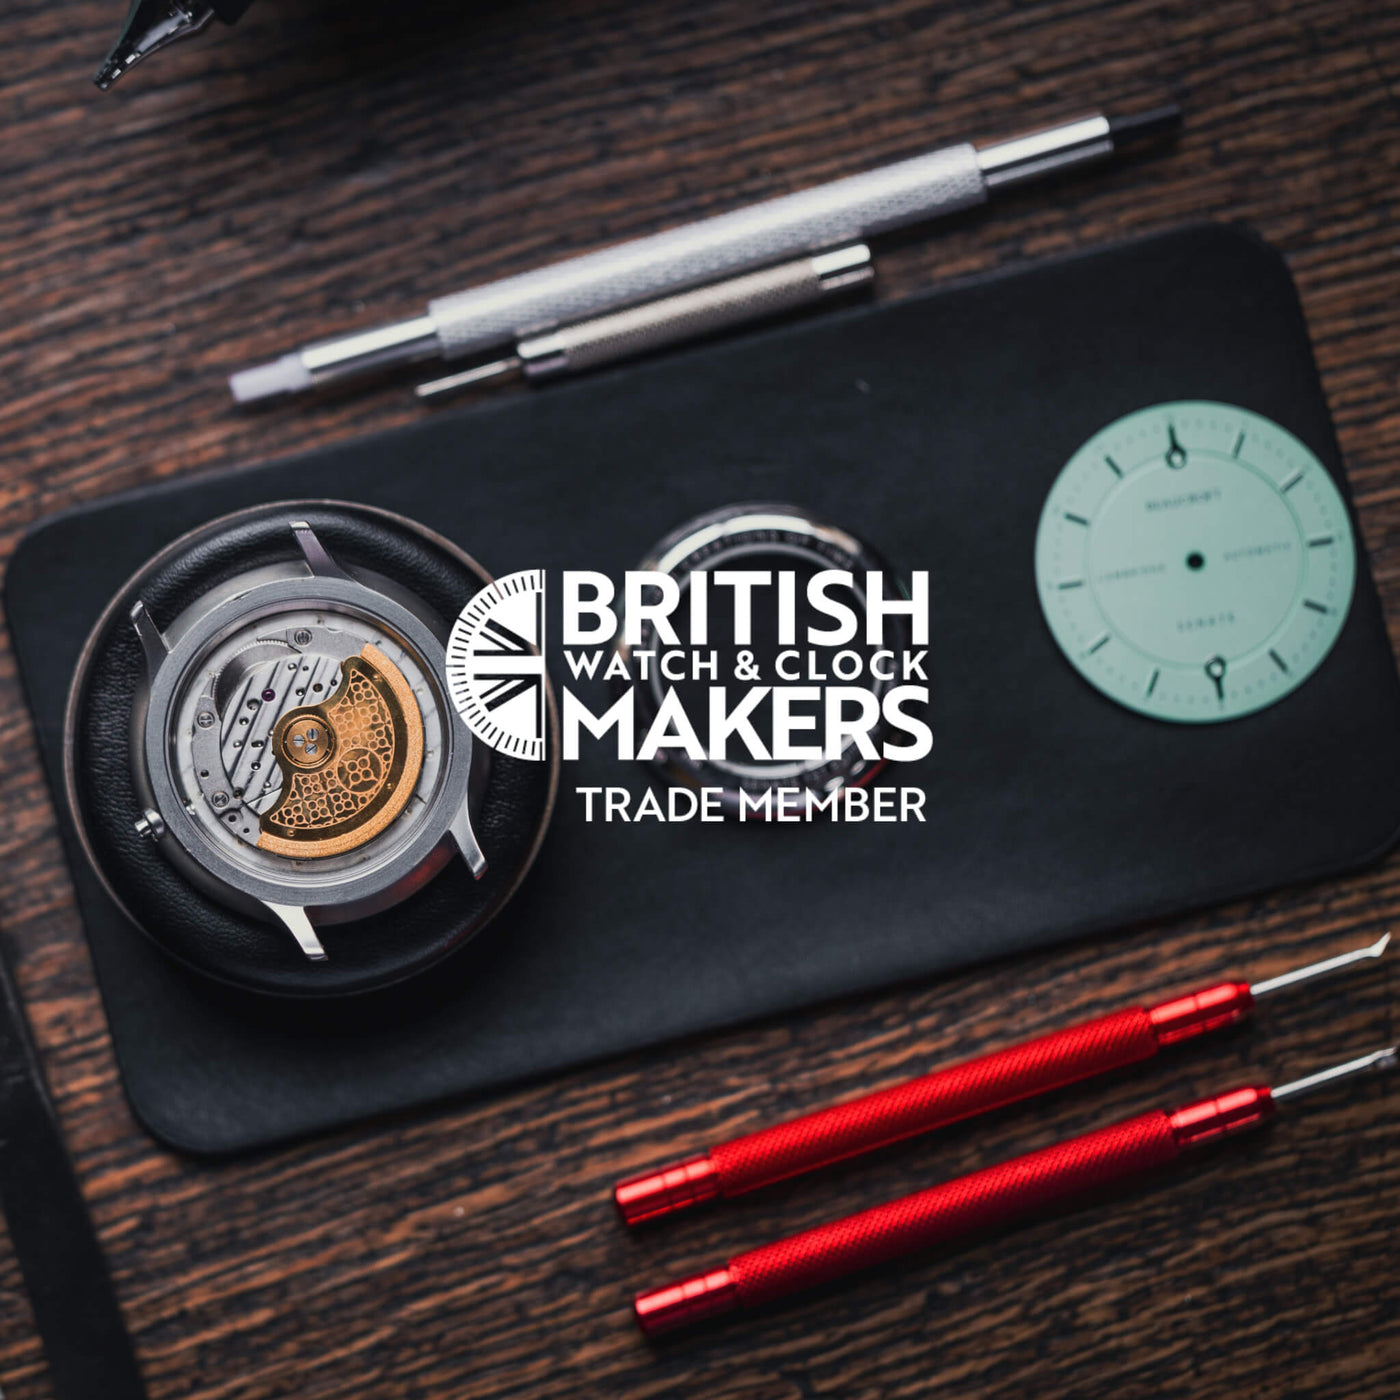 Beaucroft watches are a trade member of the British watch and clock makers